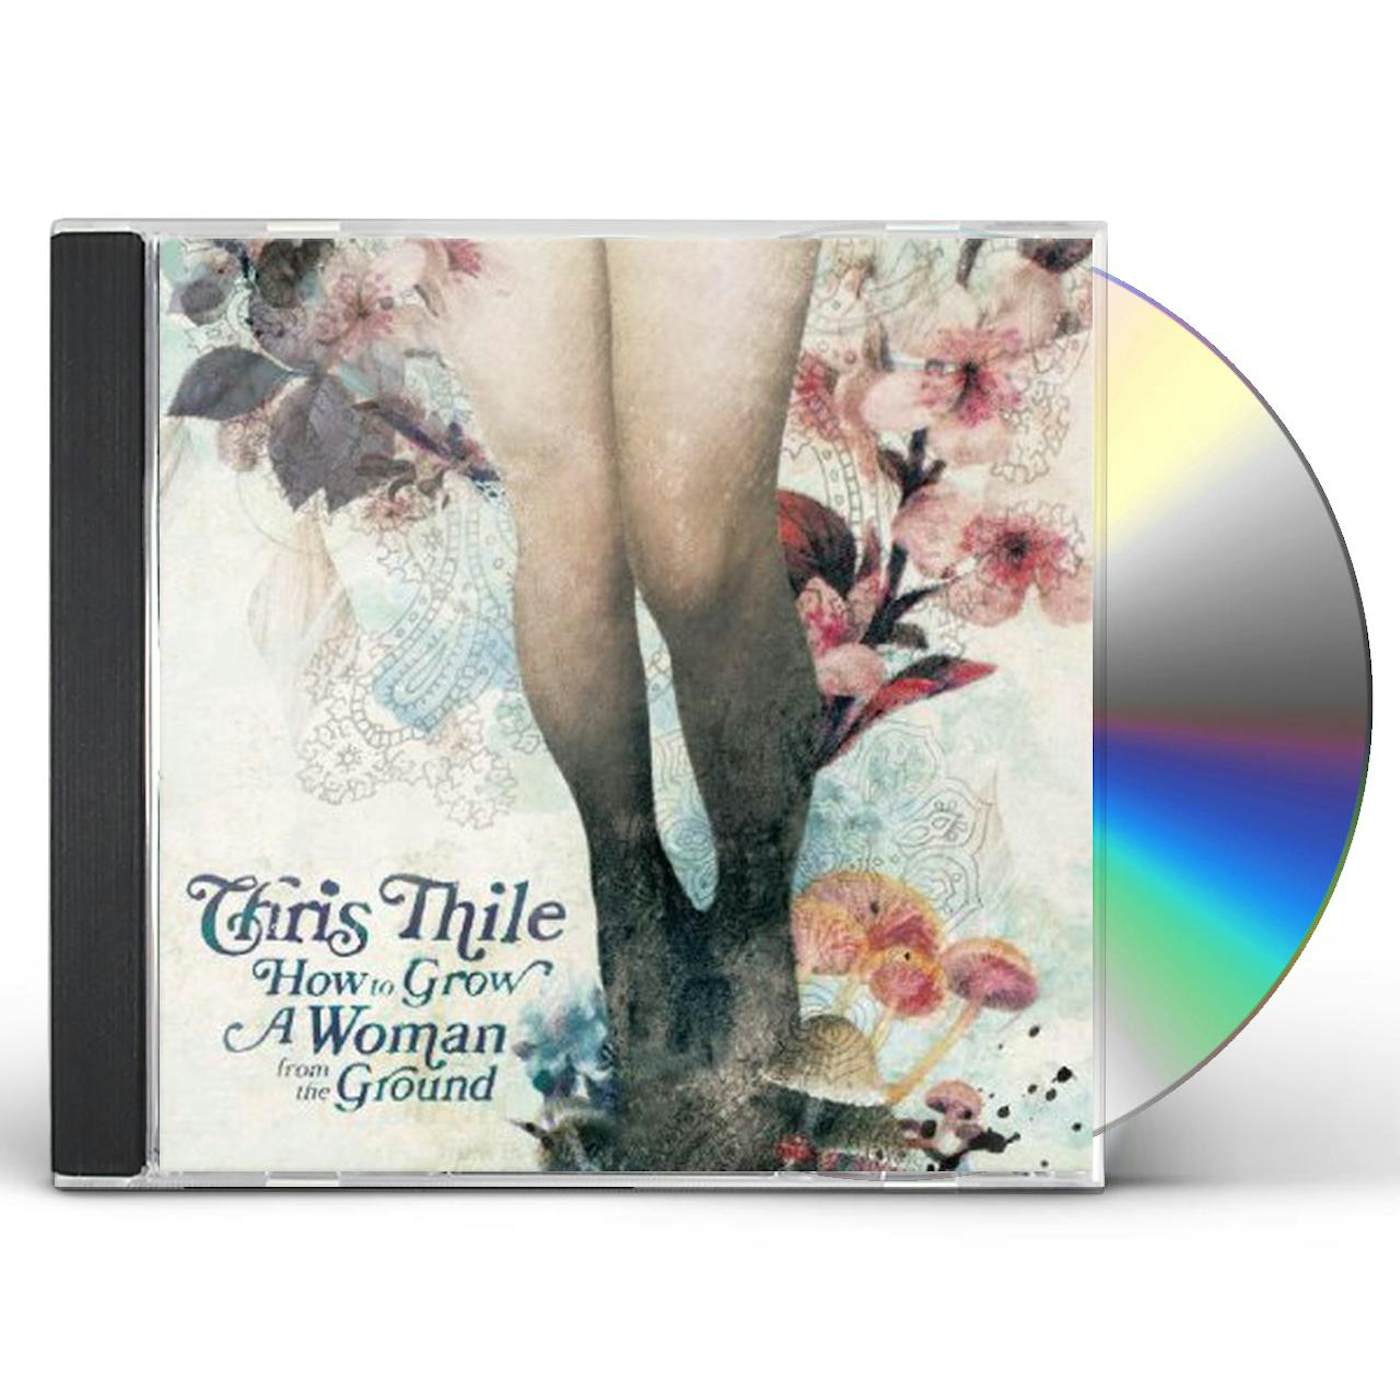 Chris Thile HOW TO GROW A WOMAN FROM THE GROUND CD